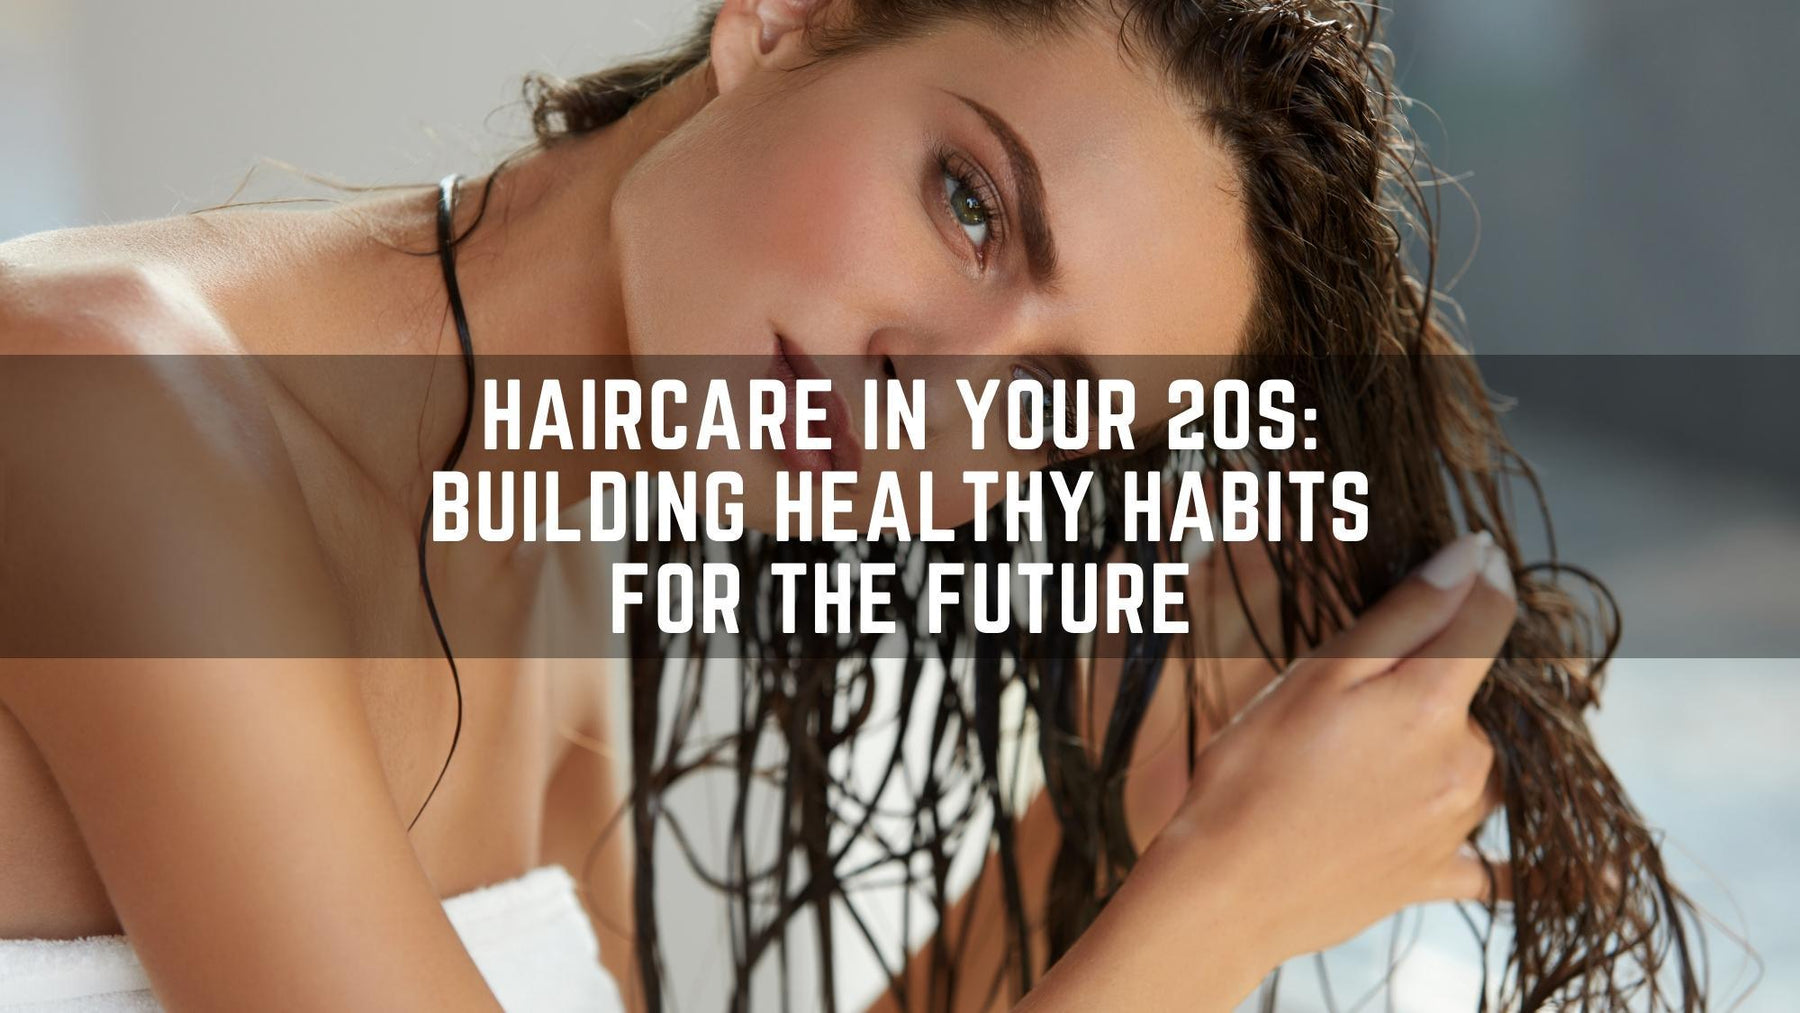 "Haircare in Your 20s: Building Healthy Habits for the Future"-Barbersets.com, best quality barber supplier.